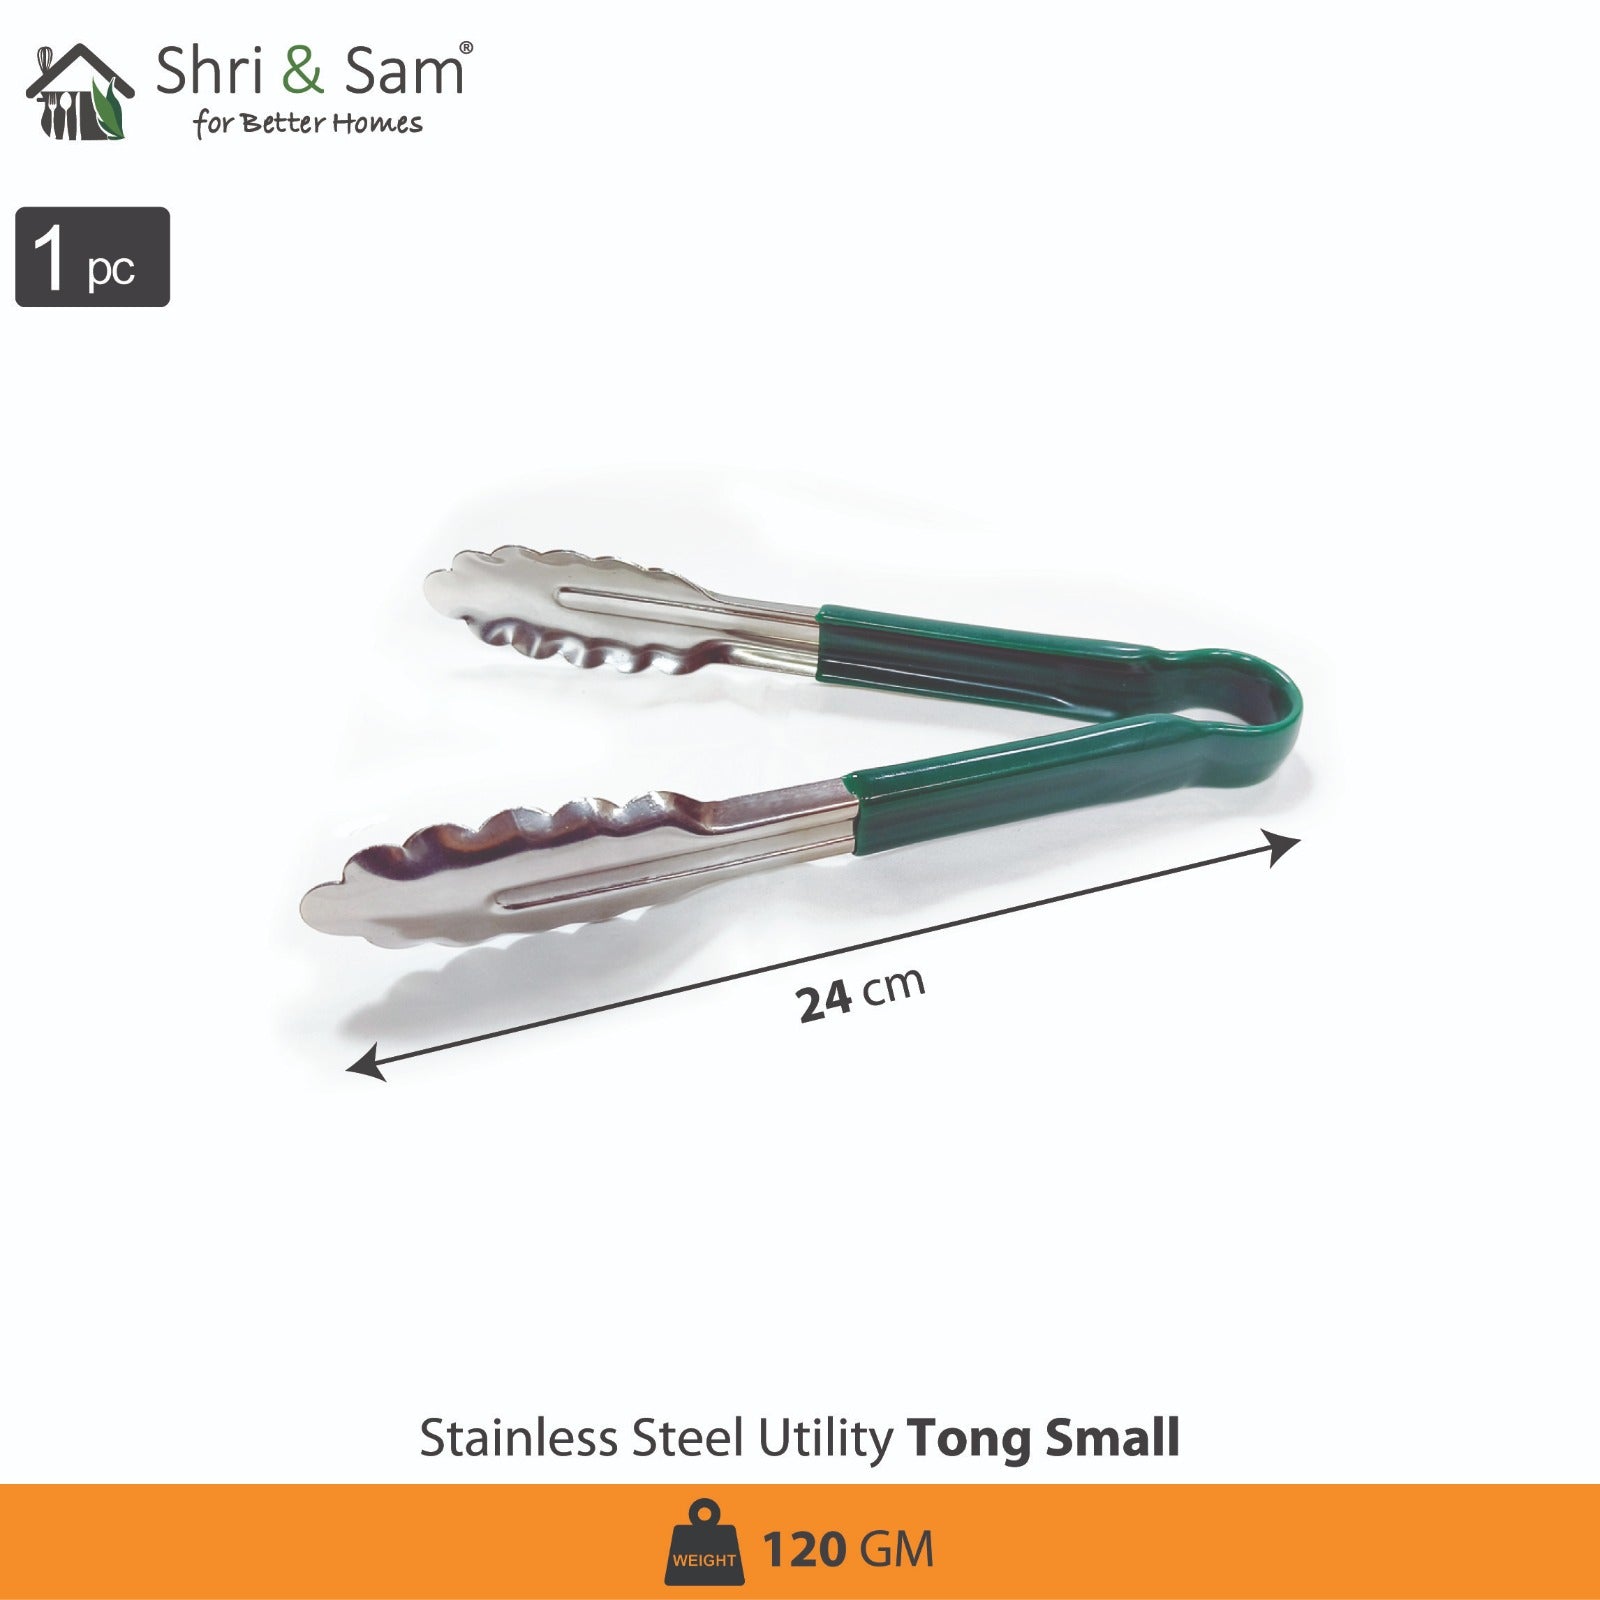 Stainless Steel Utility Tong Small